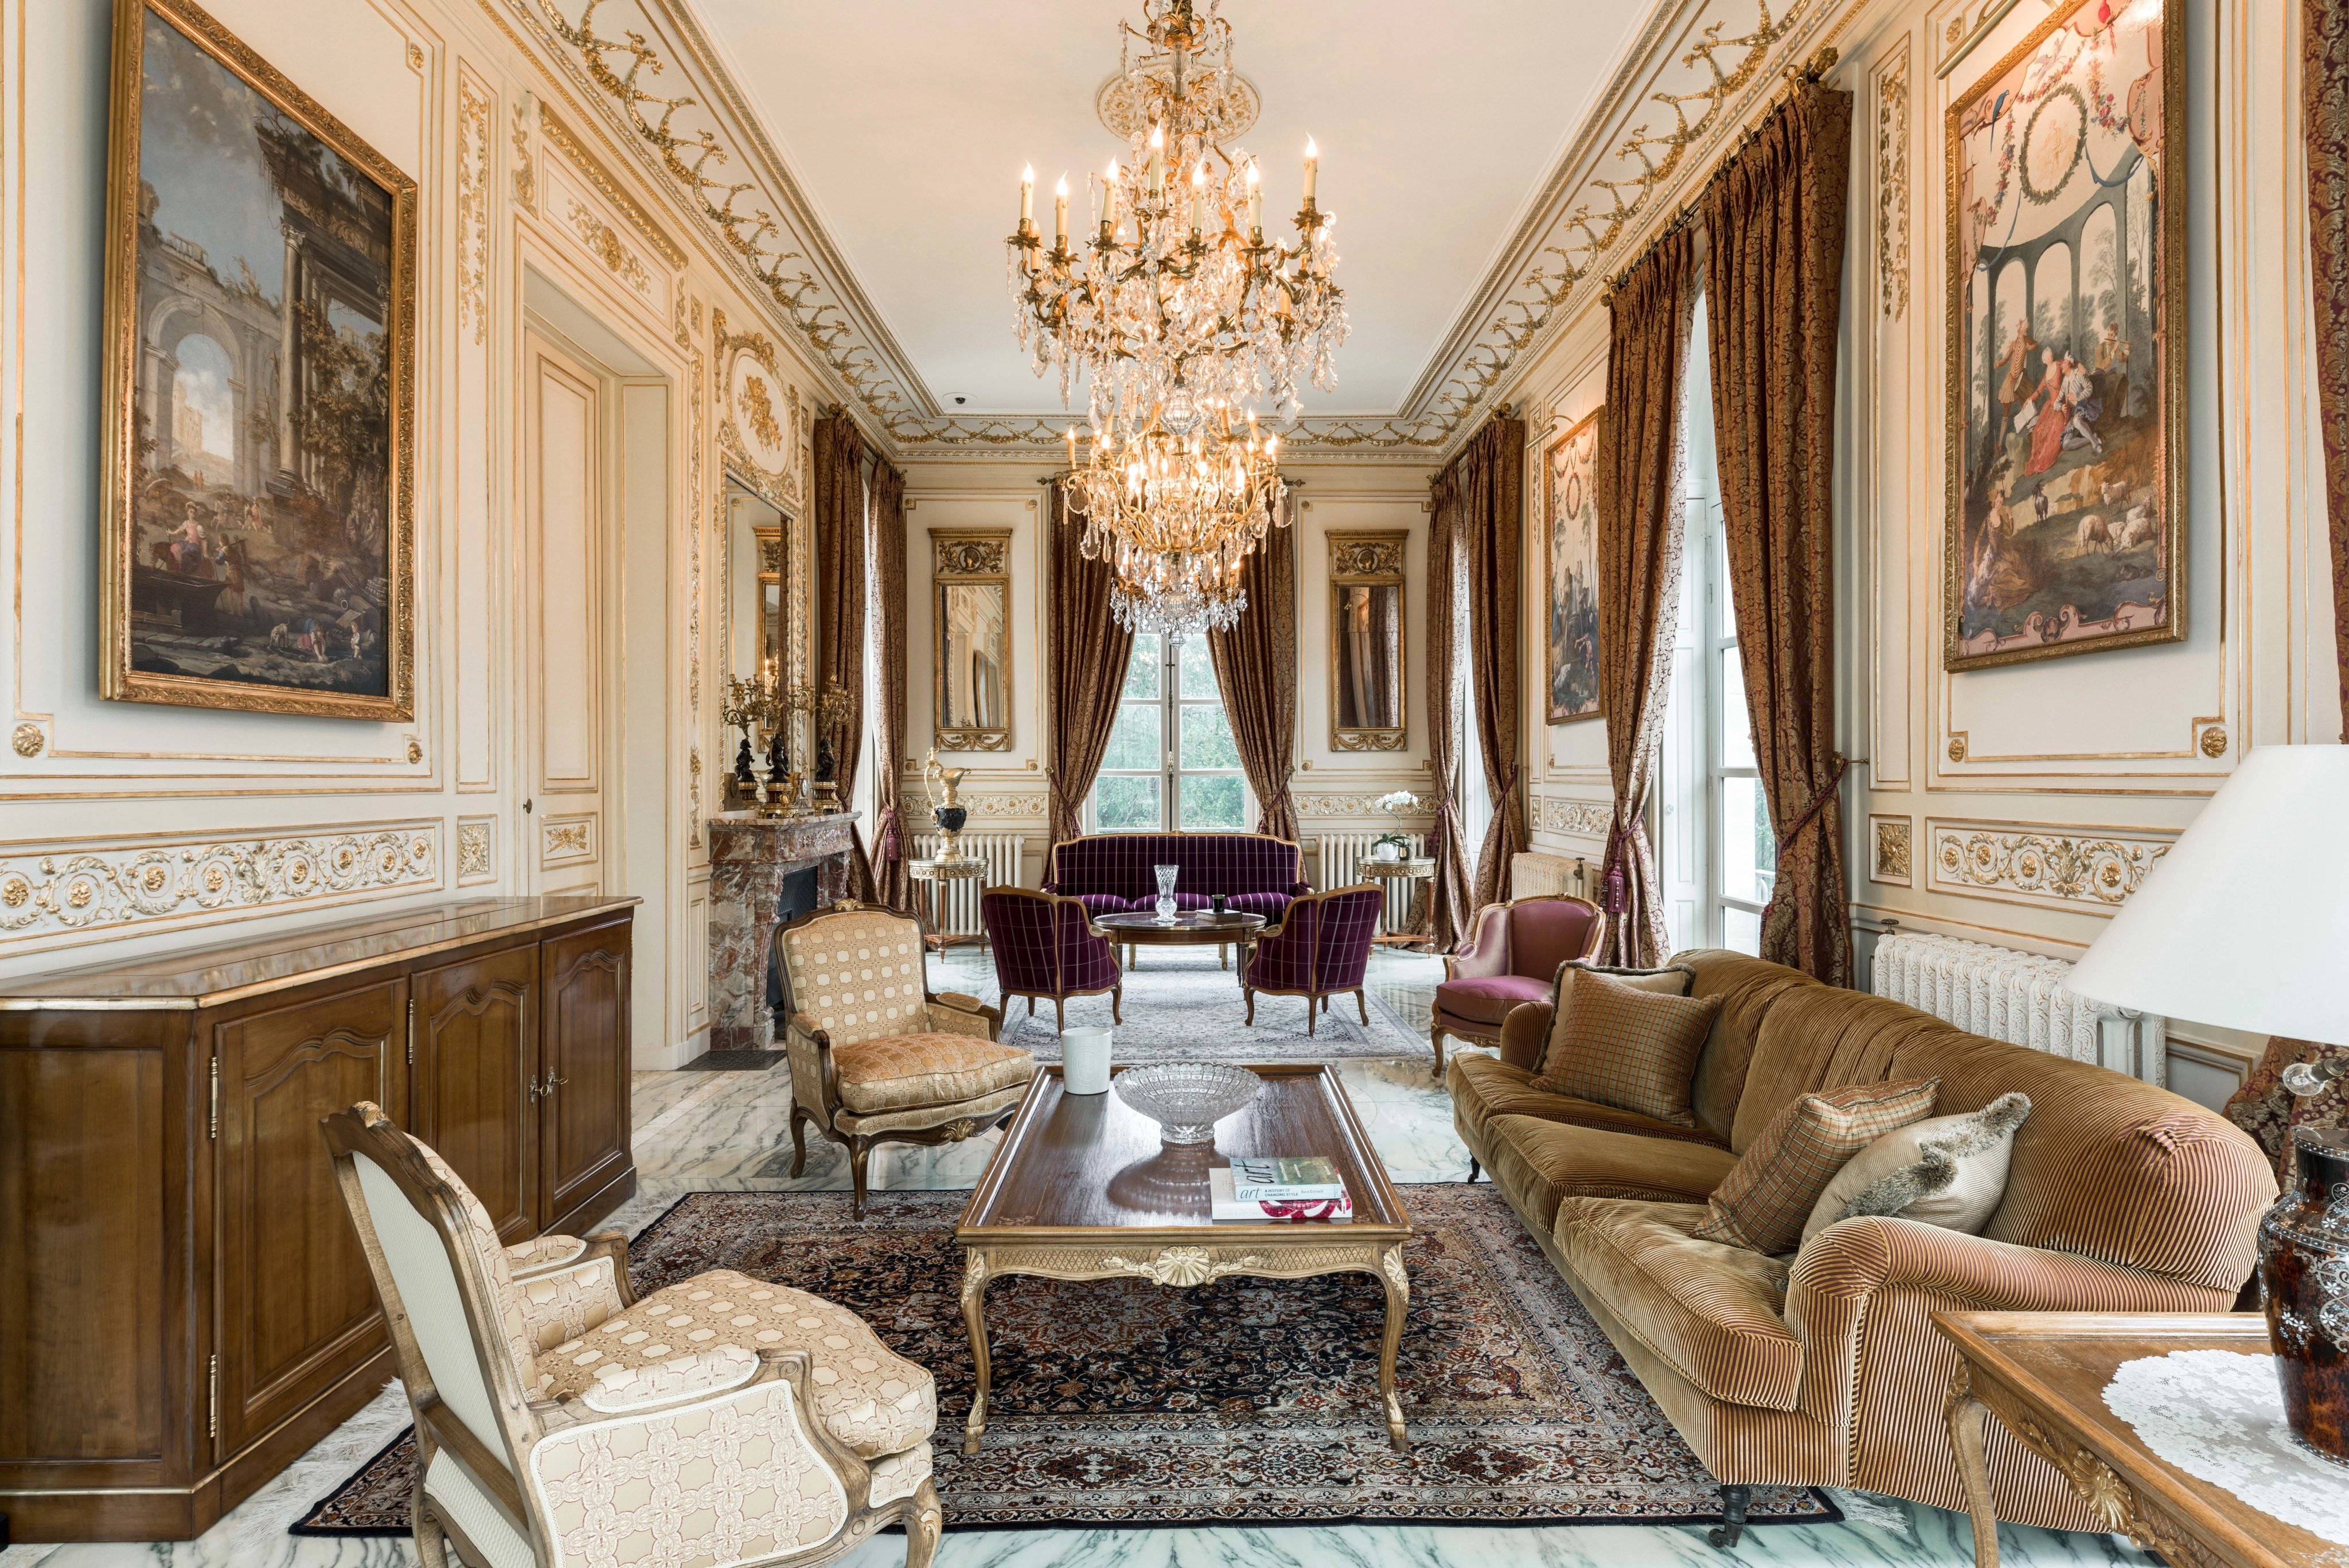 A sublime Palais inspired by Grand Trianon Palace, 20 min from Paris_1339